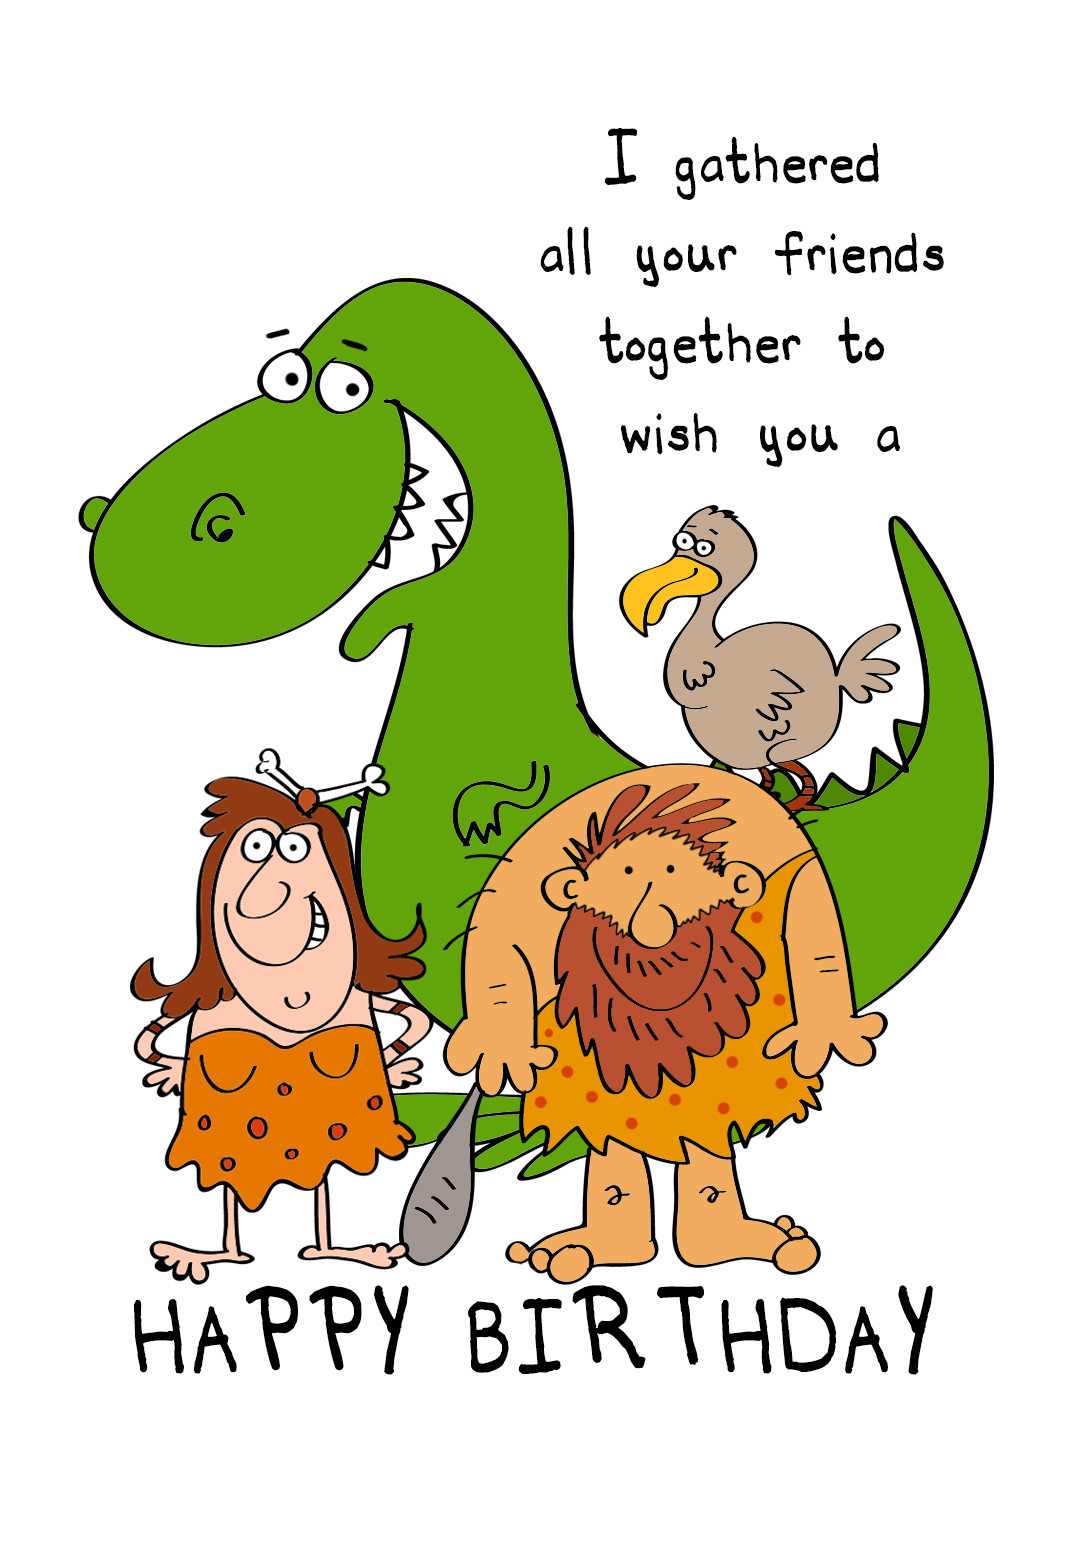 Funny Birthday Card Printable
 Friends Gathered To her Free Birthday Card